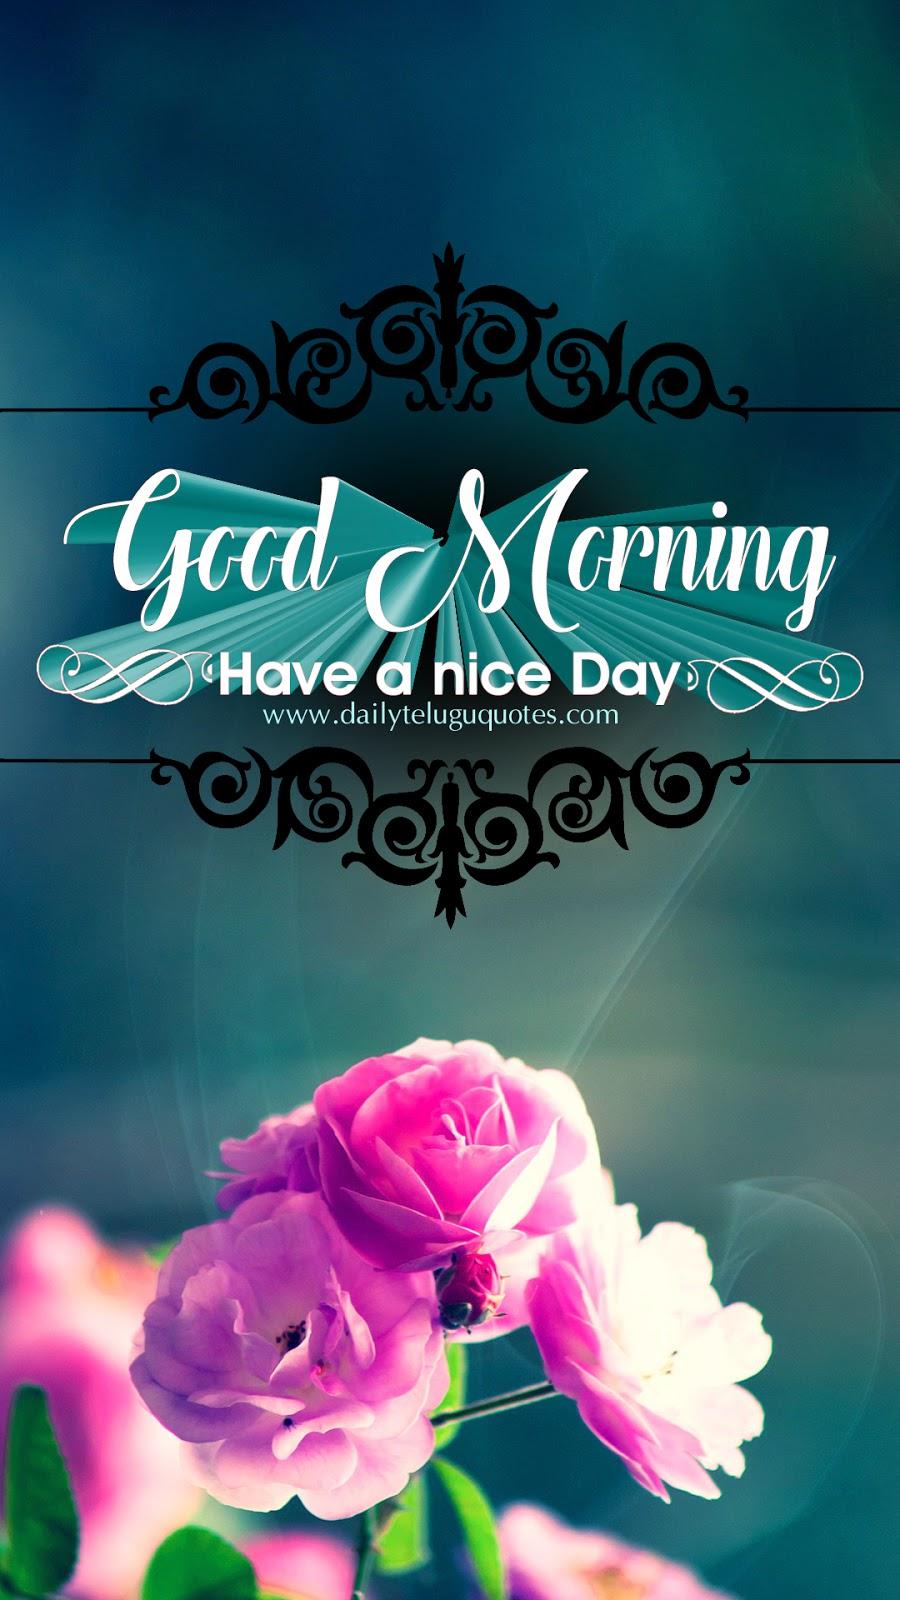 Good Morning HD Mobile Quotes And Wallpaper Free Online